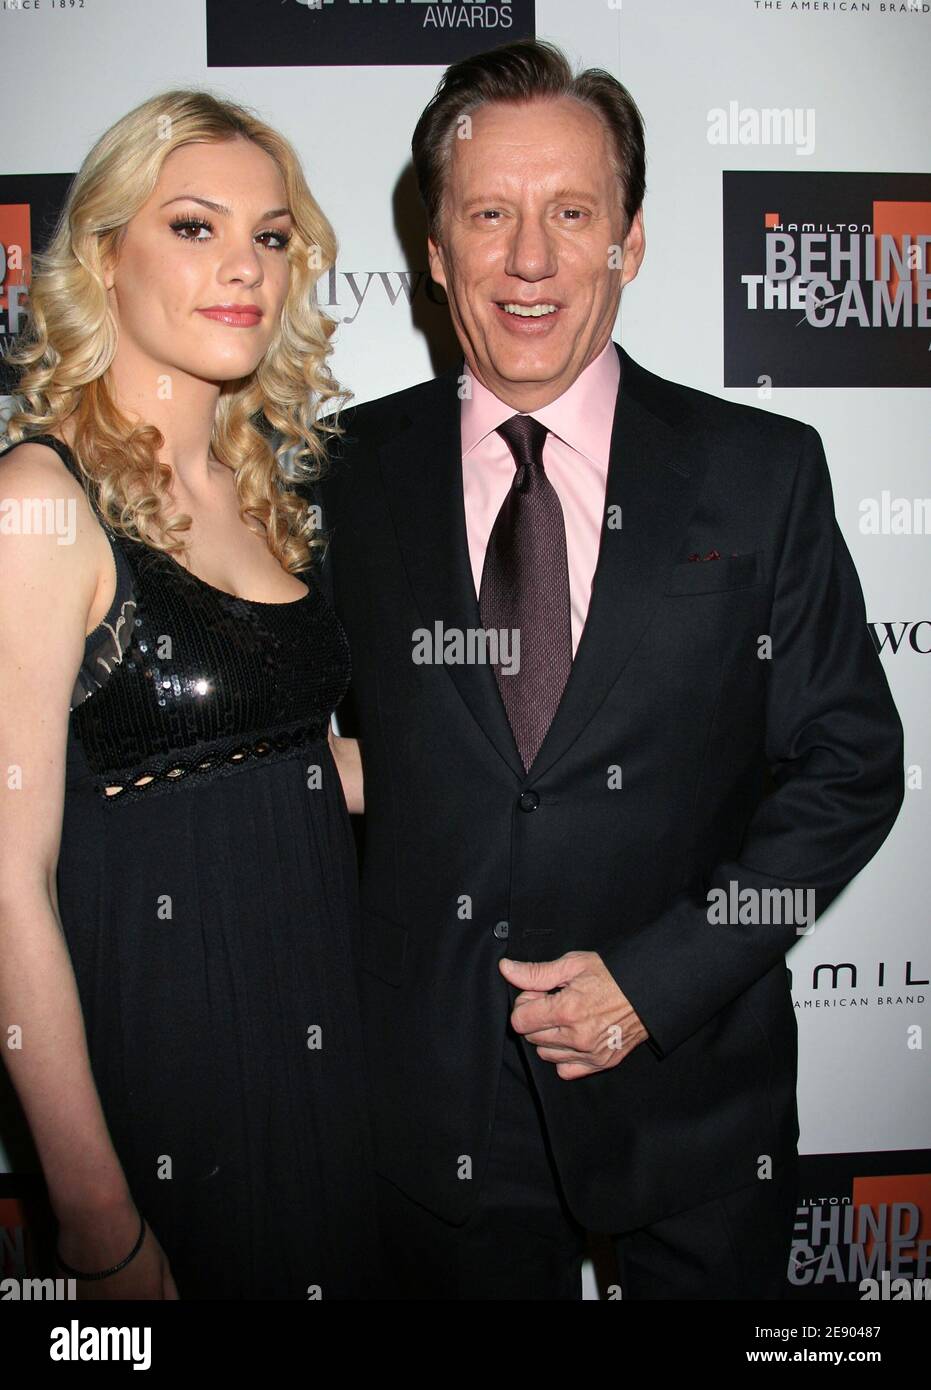 James Woods and girlfriend Ashley Madison arriving for the 2nd annual Hamilton Behind the Camera Awards hosted by Hollywood Life at The Highlands in Hollywood, Los Angeles, CA, USA on November 11, 2007. Photo by Baxter/ABACAPRESS.COM Stock Photo